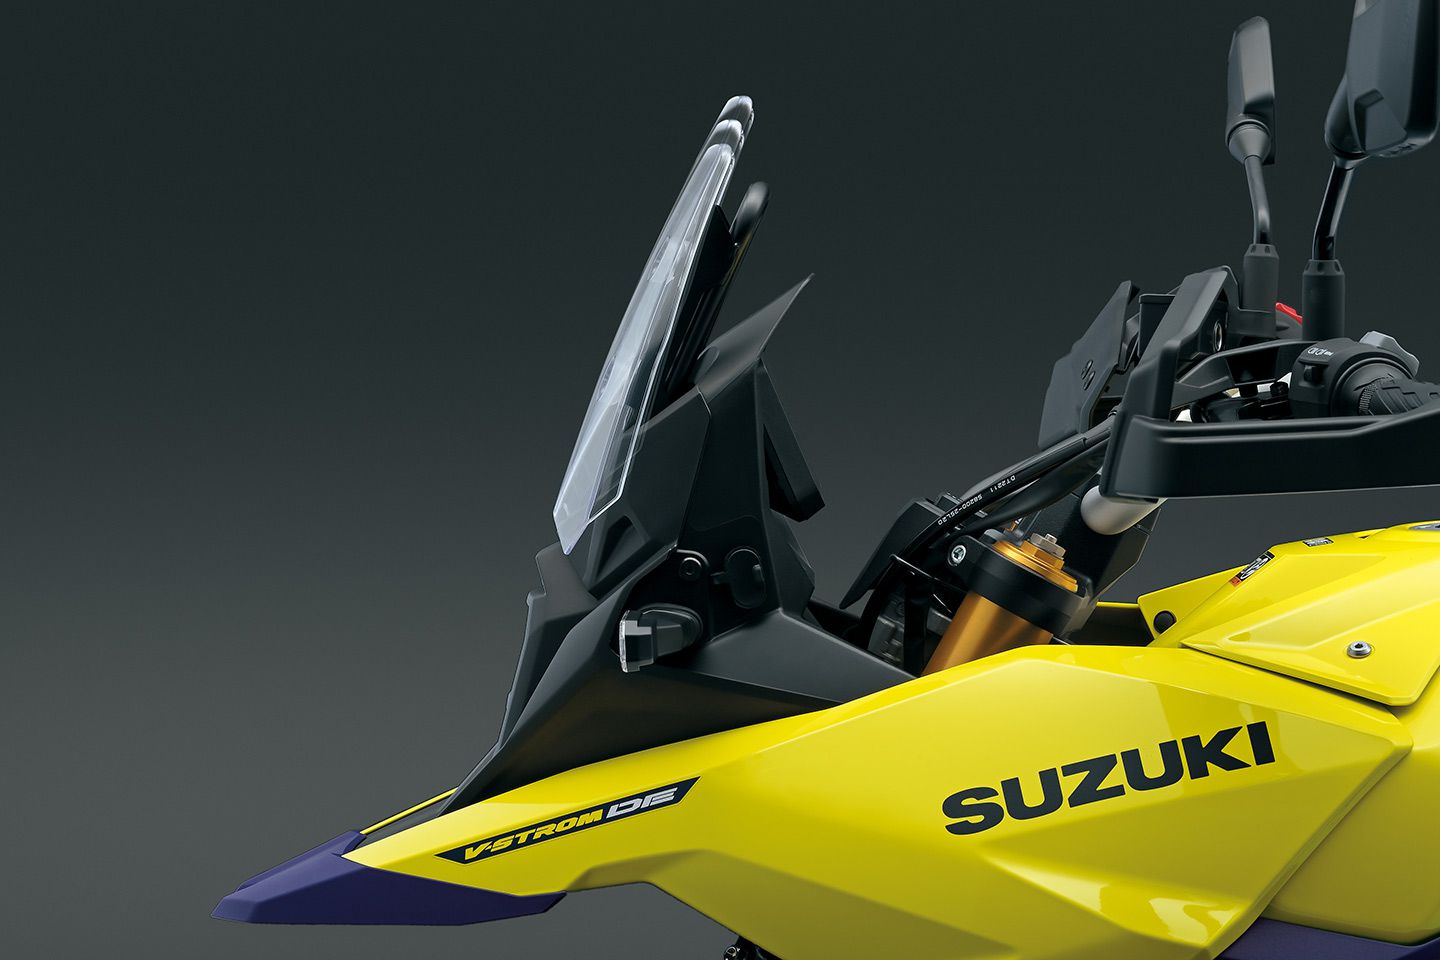 The 800DE’s design is a welcomed departure from the outdated design used for Suzuki’s 650 platform.